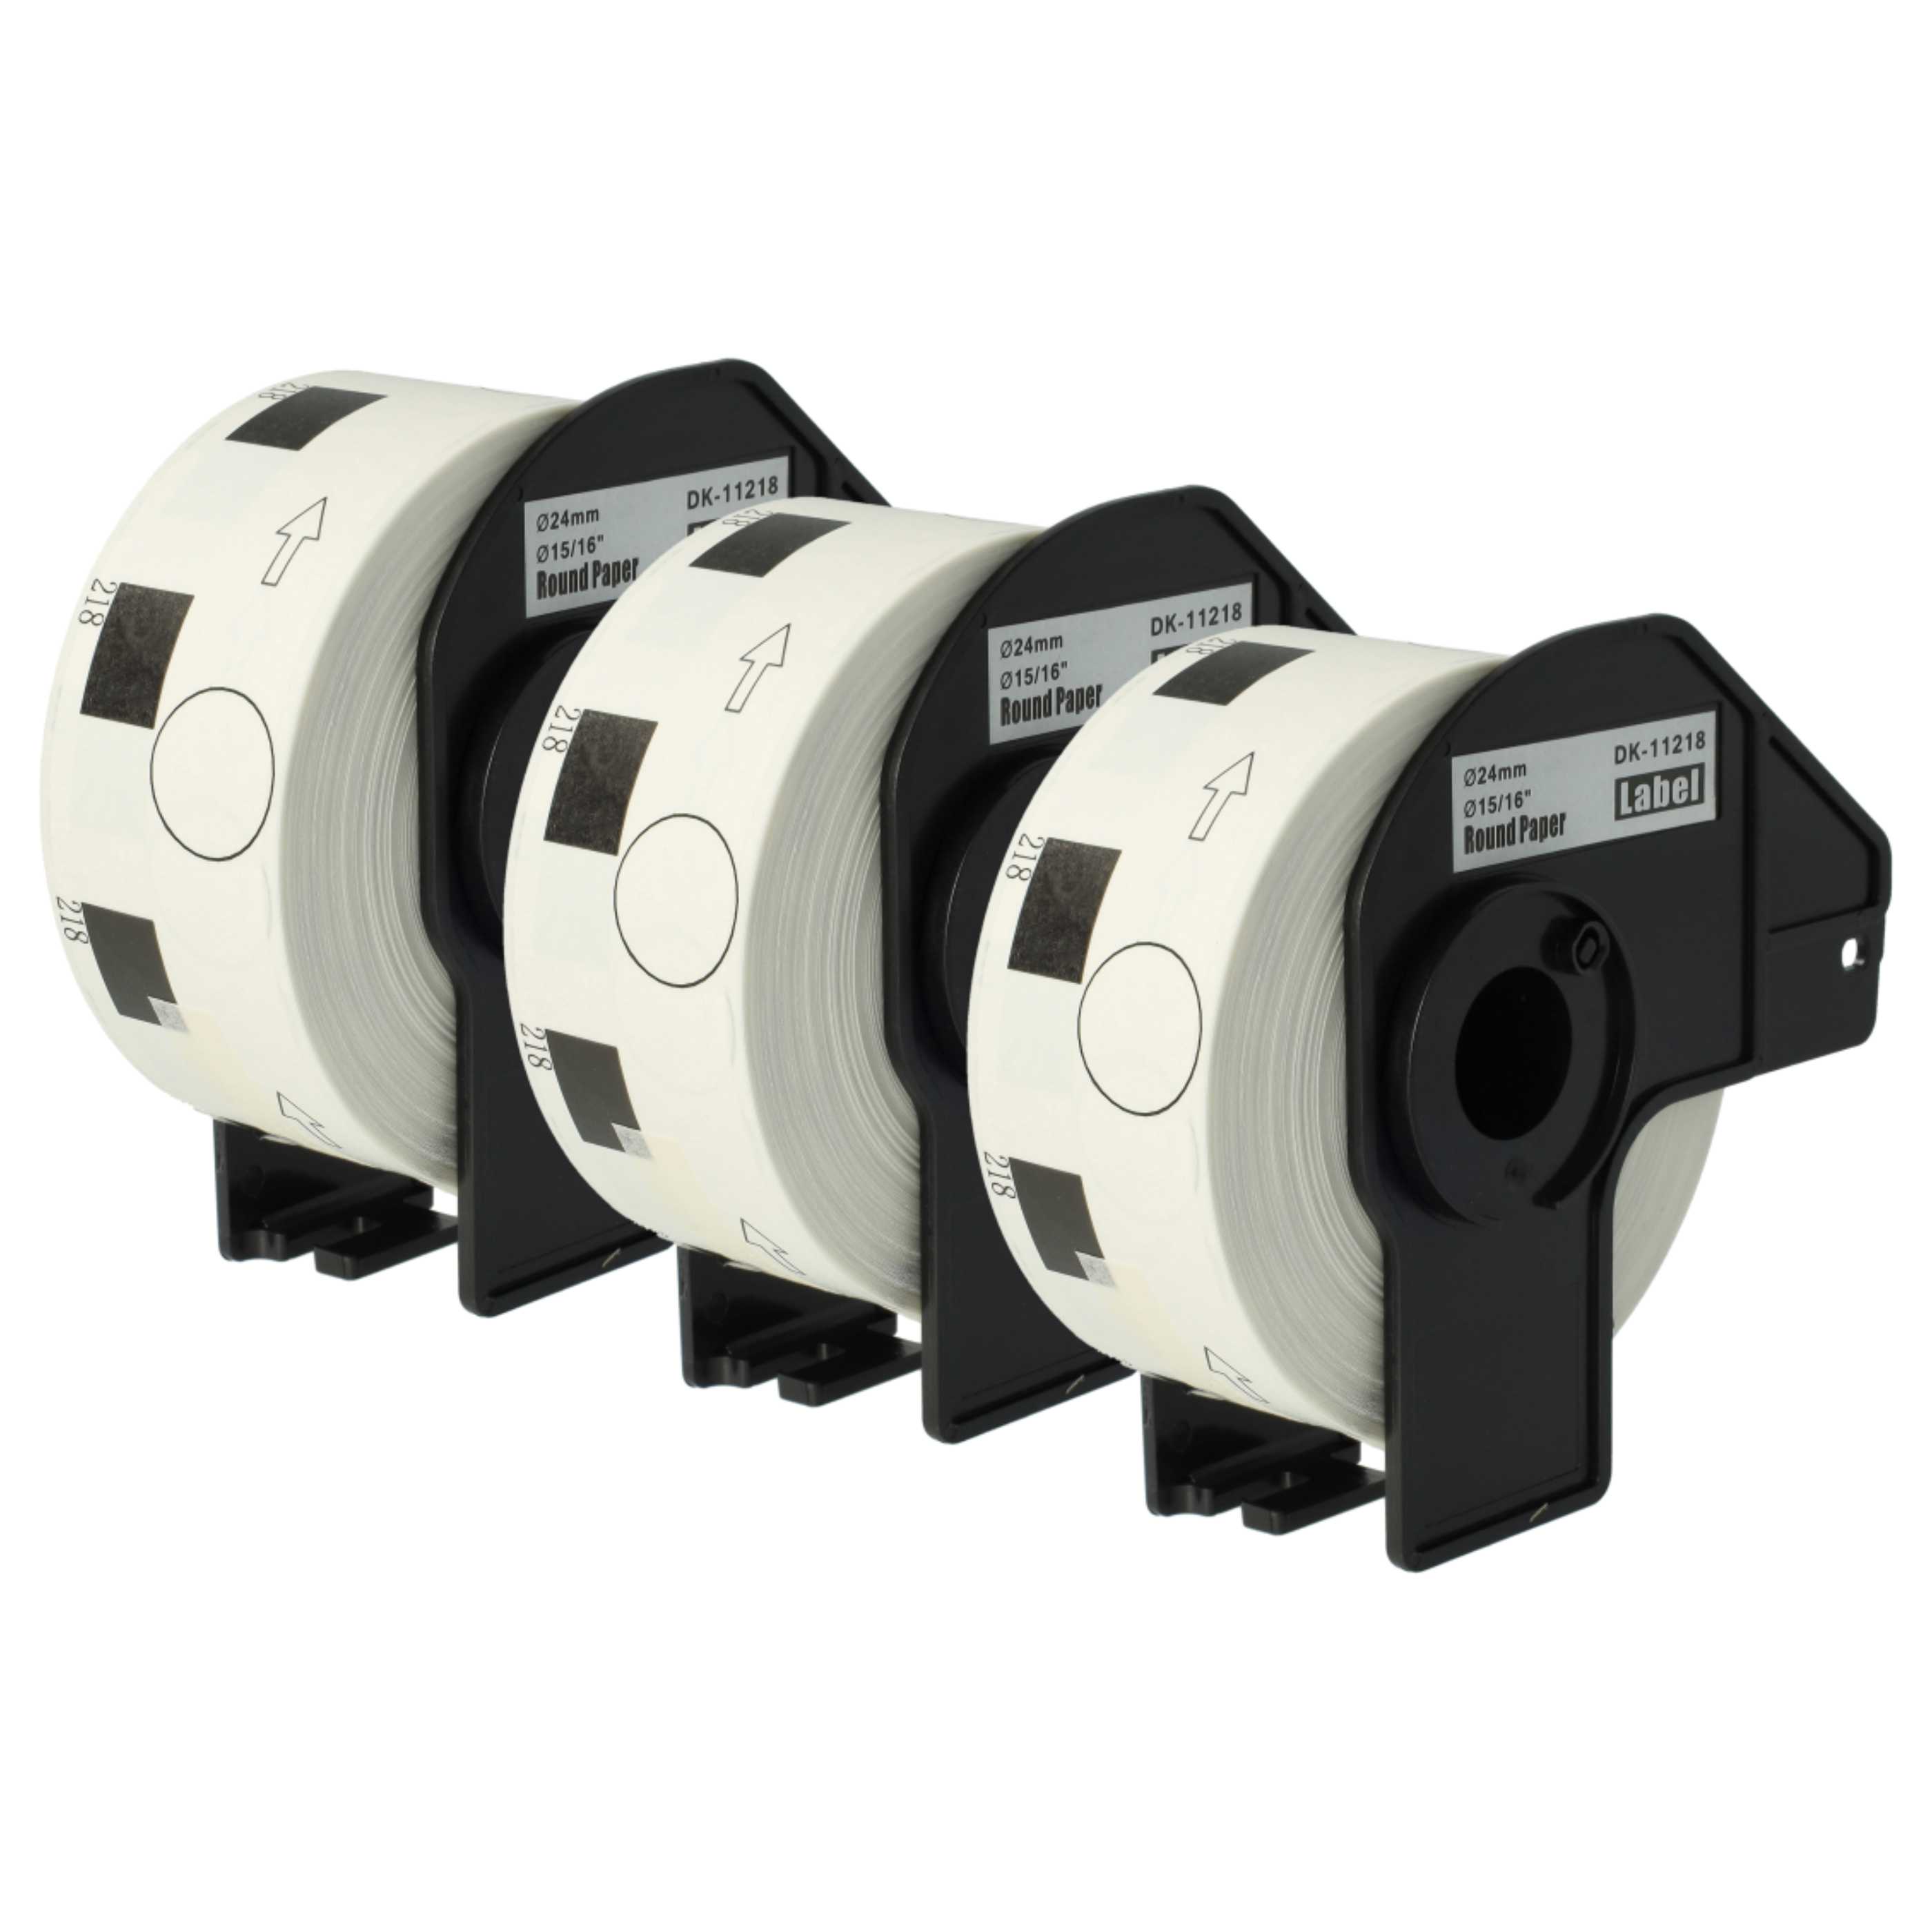 3x Labels replaces Brother DK-11218 for Labeller - Premium 24 mm + Holder